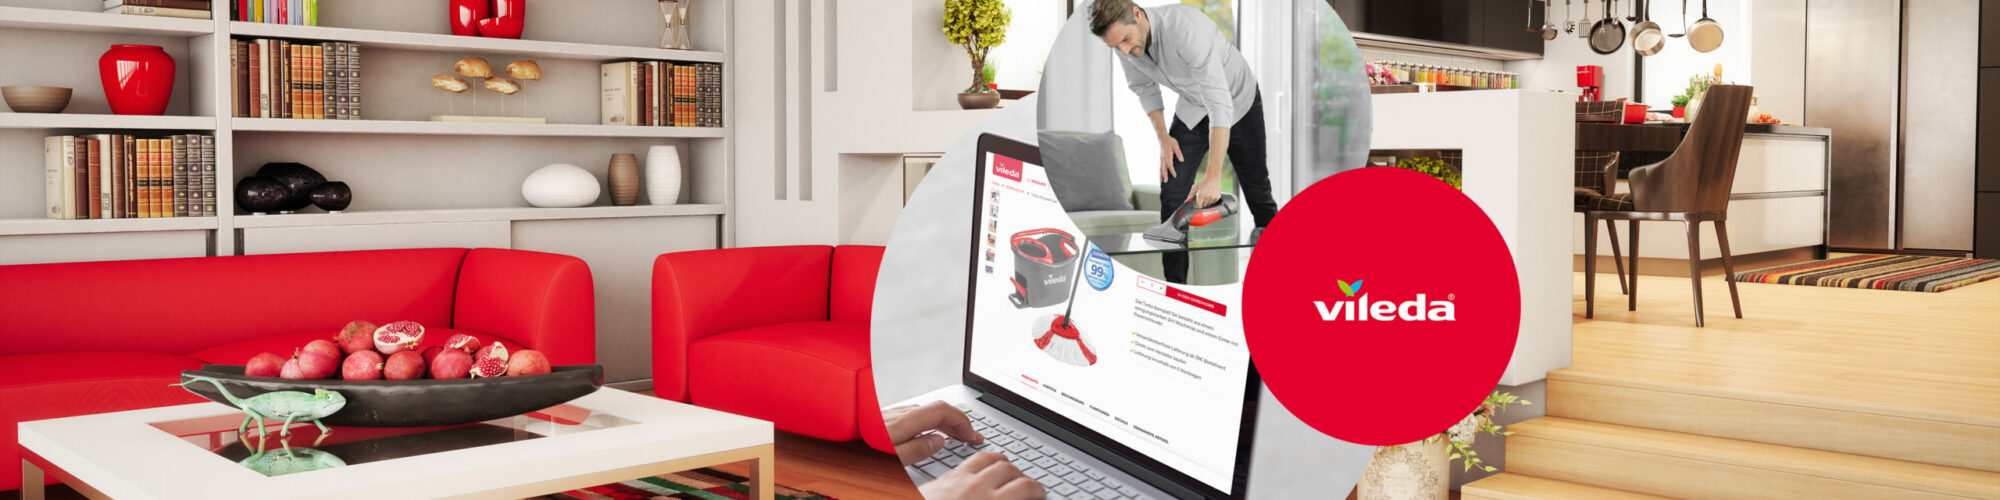 Image of a man cleaning a table, next to it the logo of Vileda and the Vileda website, valantic Case Study